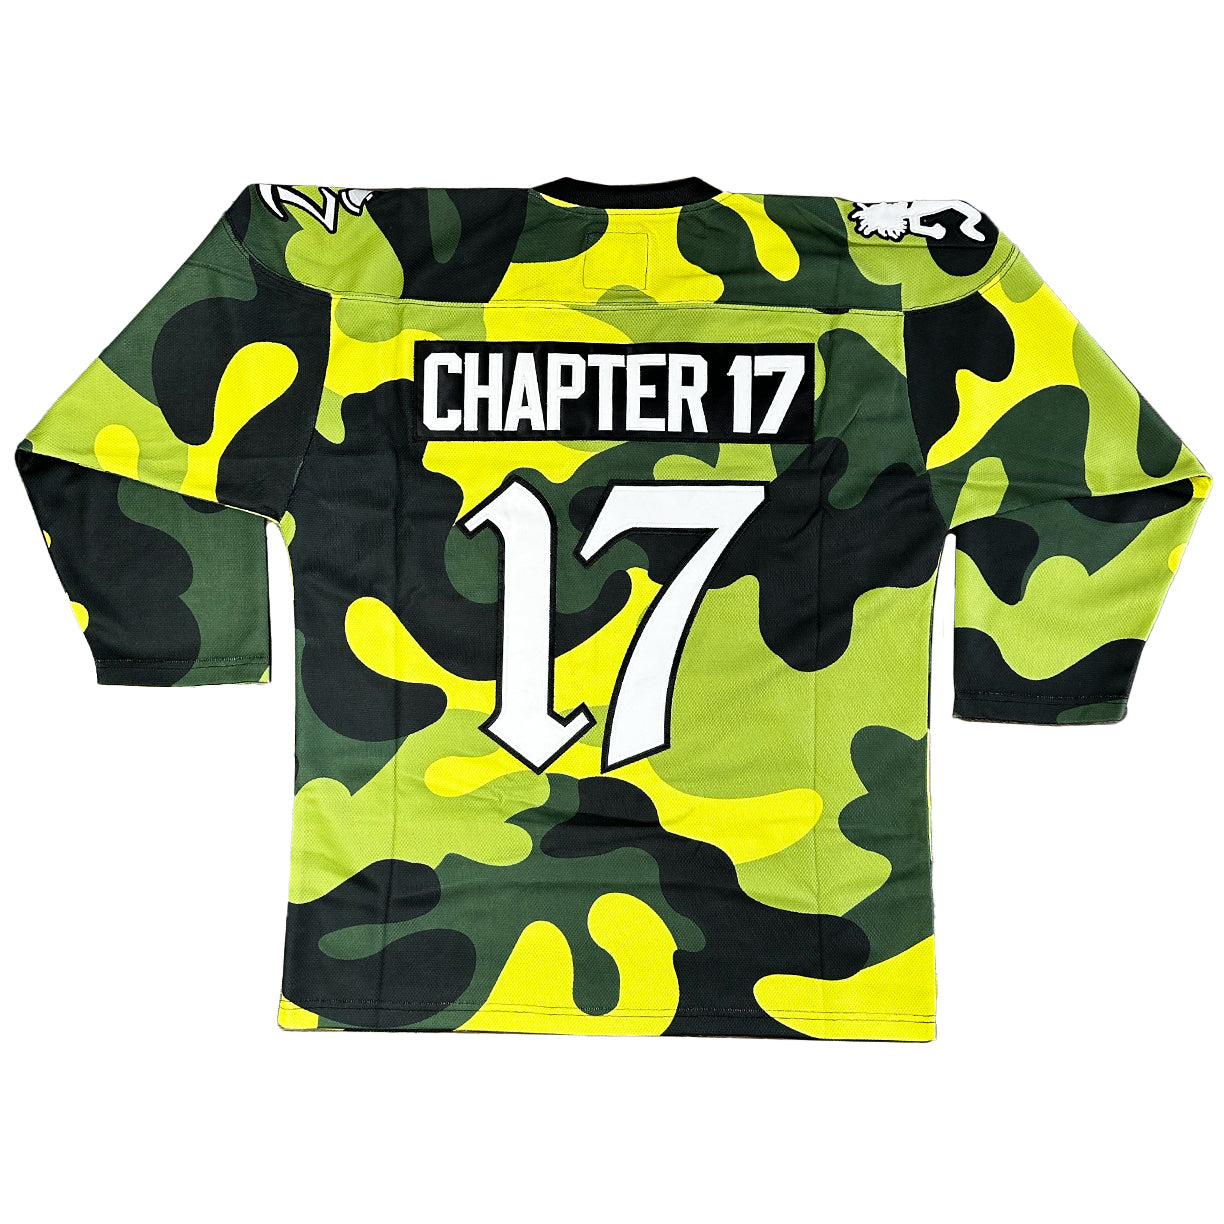 Official Chapter 17 jersey - Camo